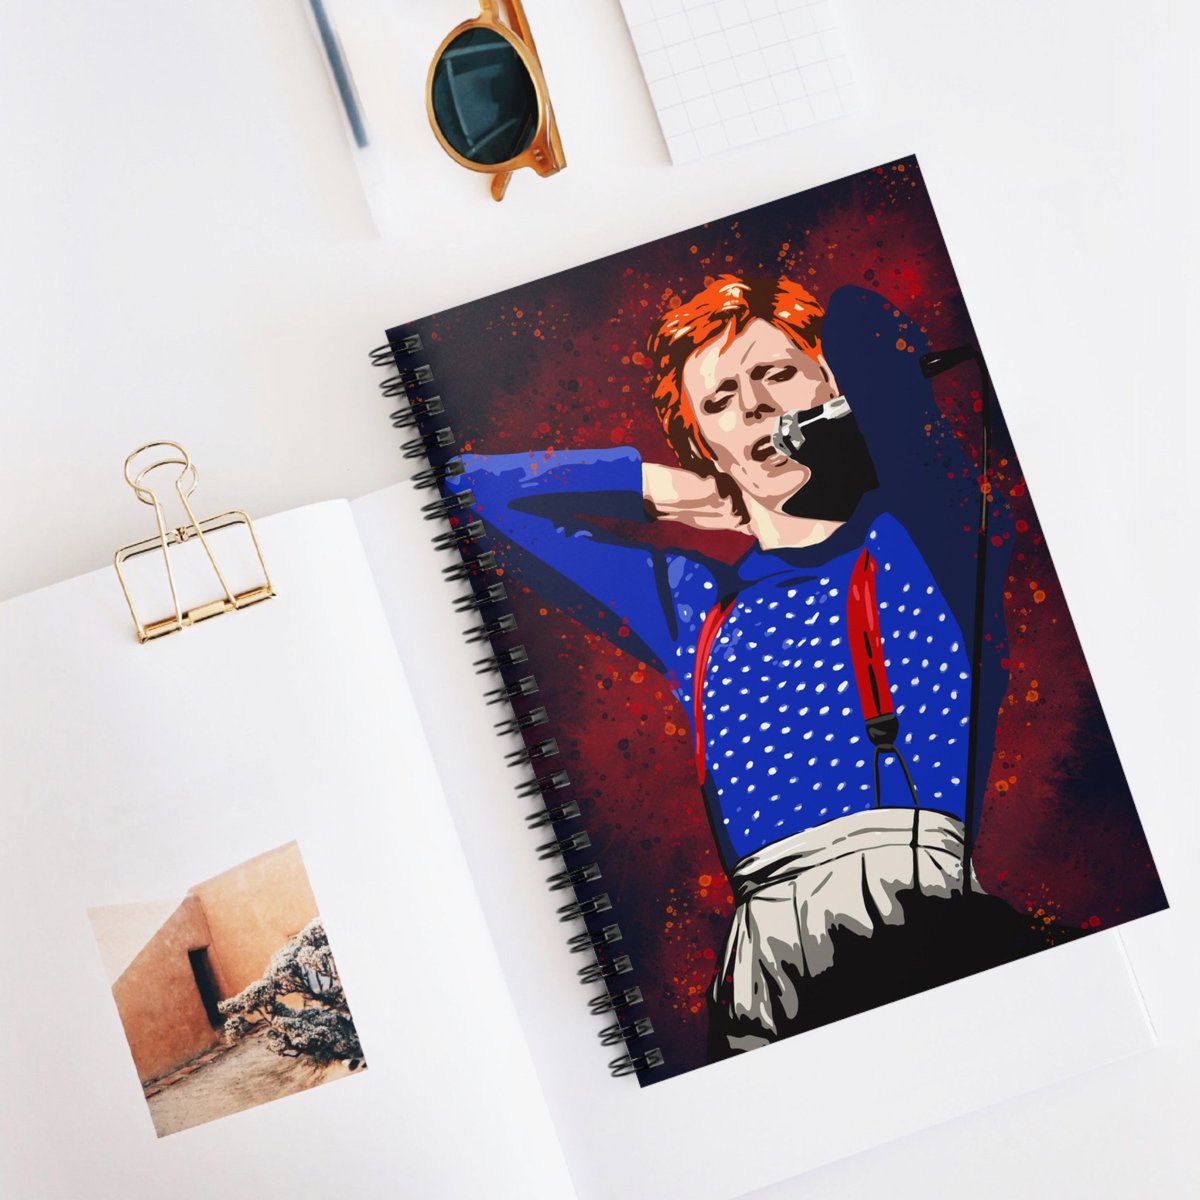 David Bowie Inspired Spiral Notebook - Ruled Line, Bowie themed journal, gift for Bowie fan tuppu.net/75159306 #GiftIdeas #GreetingCards #Artwork #Notepad